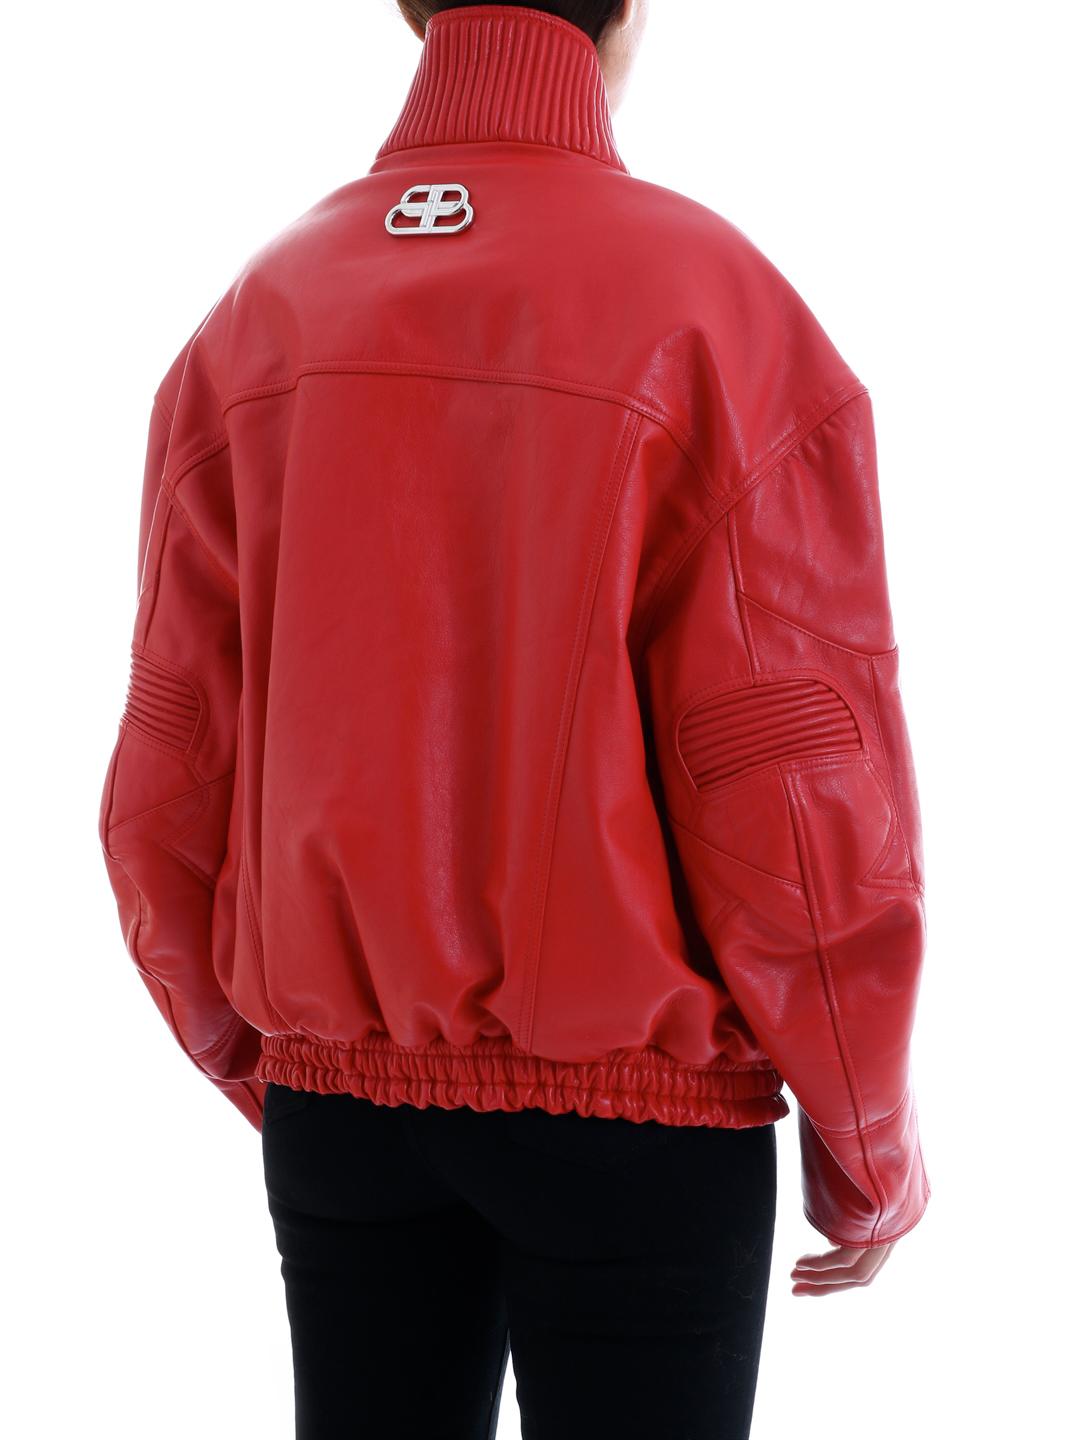 Balenciaga Leather Over Biker Jacket in Red - Lyst